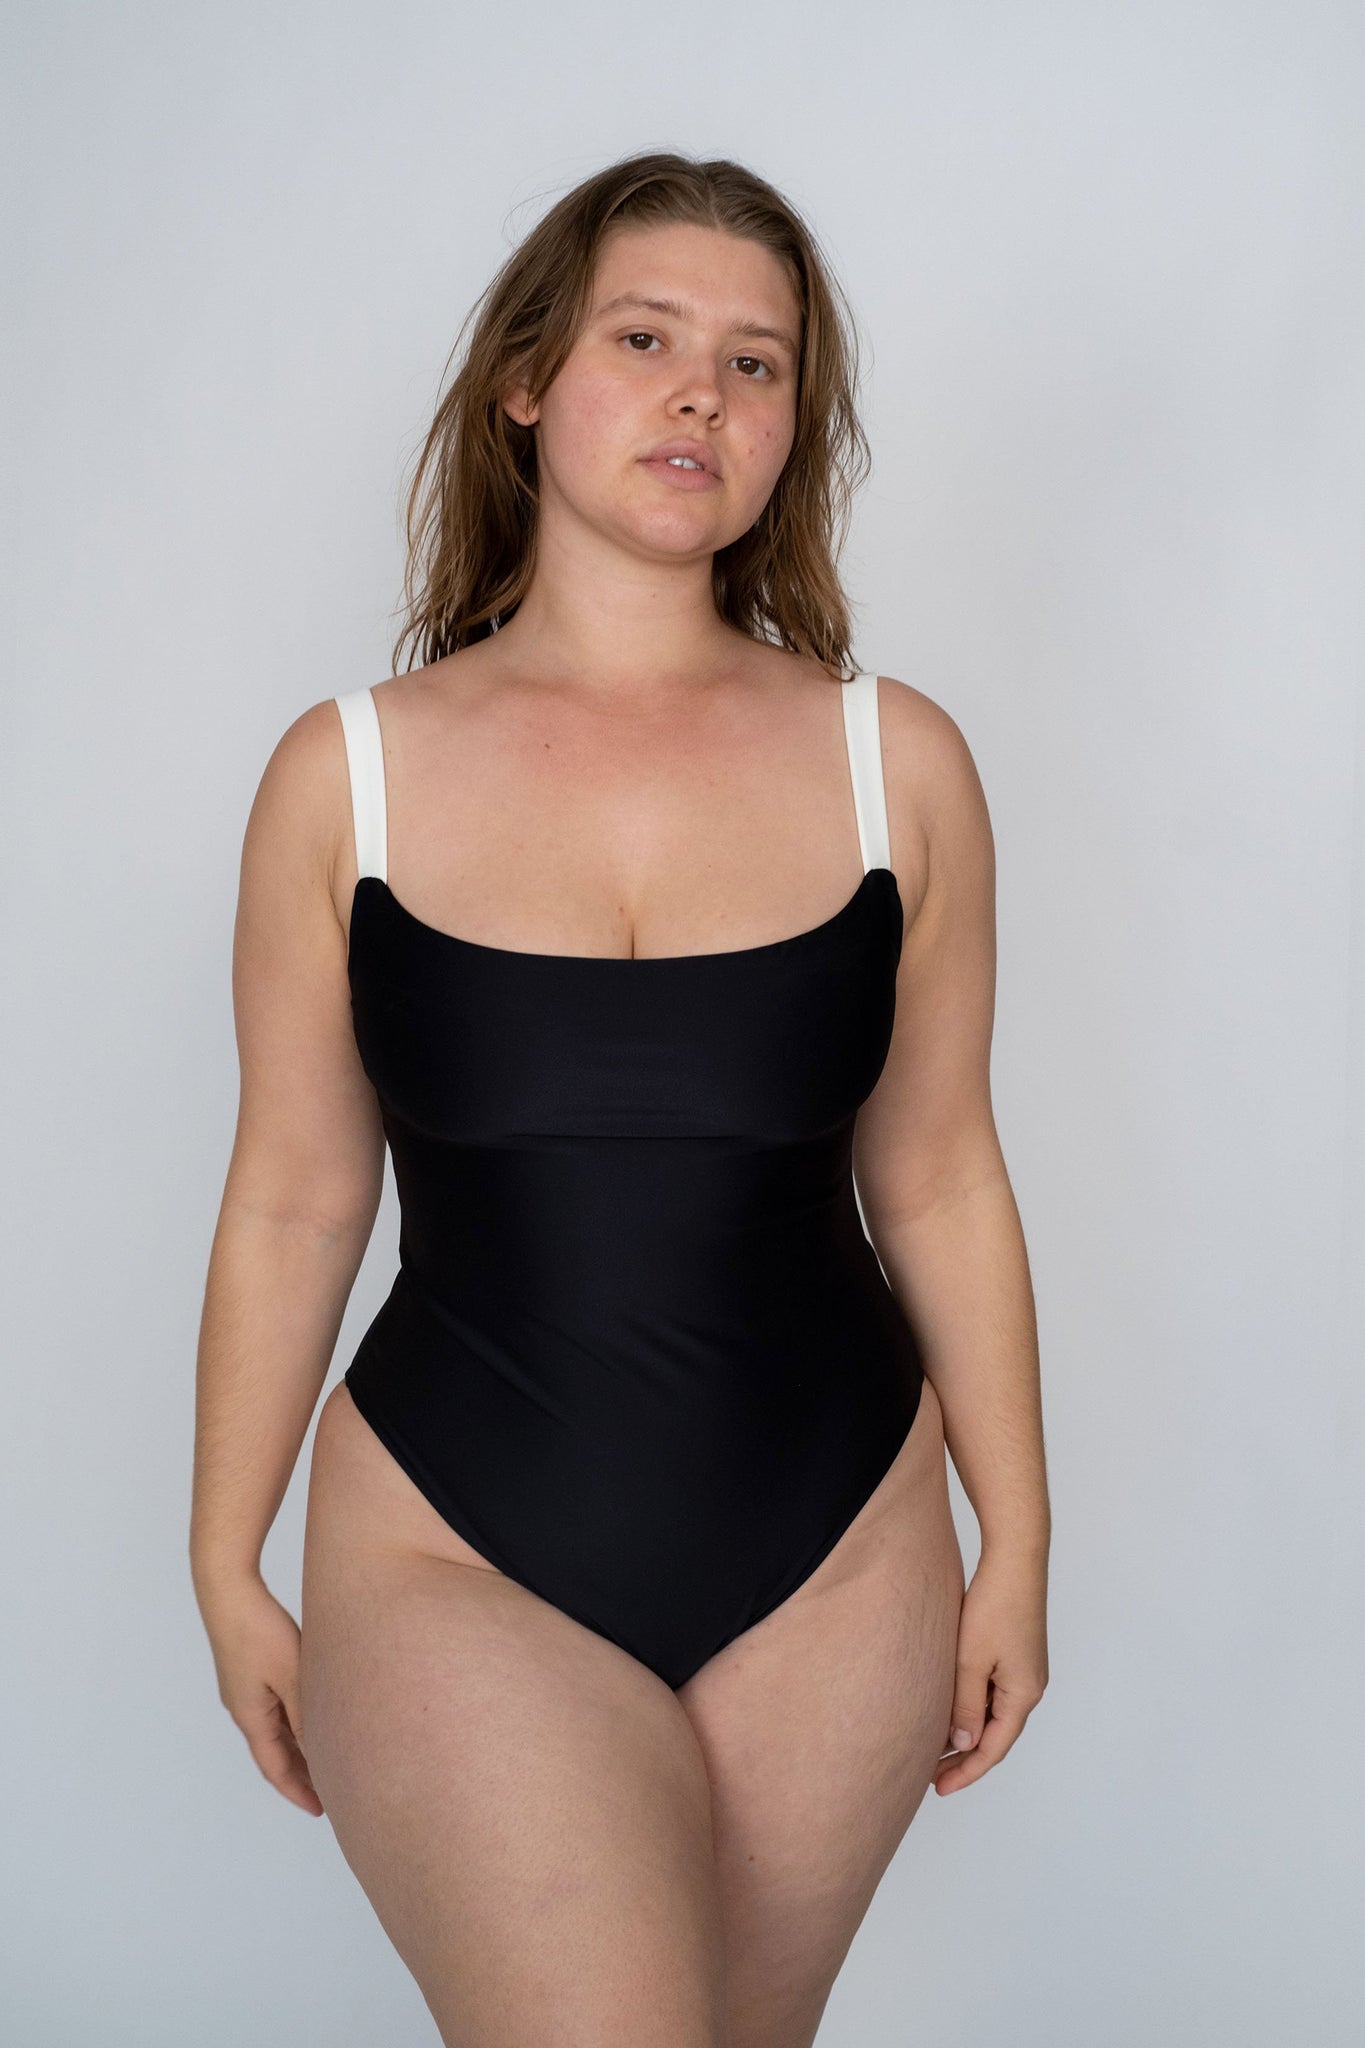 A woman standing wearing a black one piece swimsuit with white thick spaghetti straps.